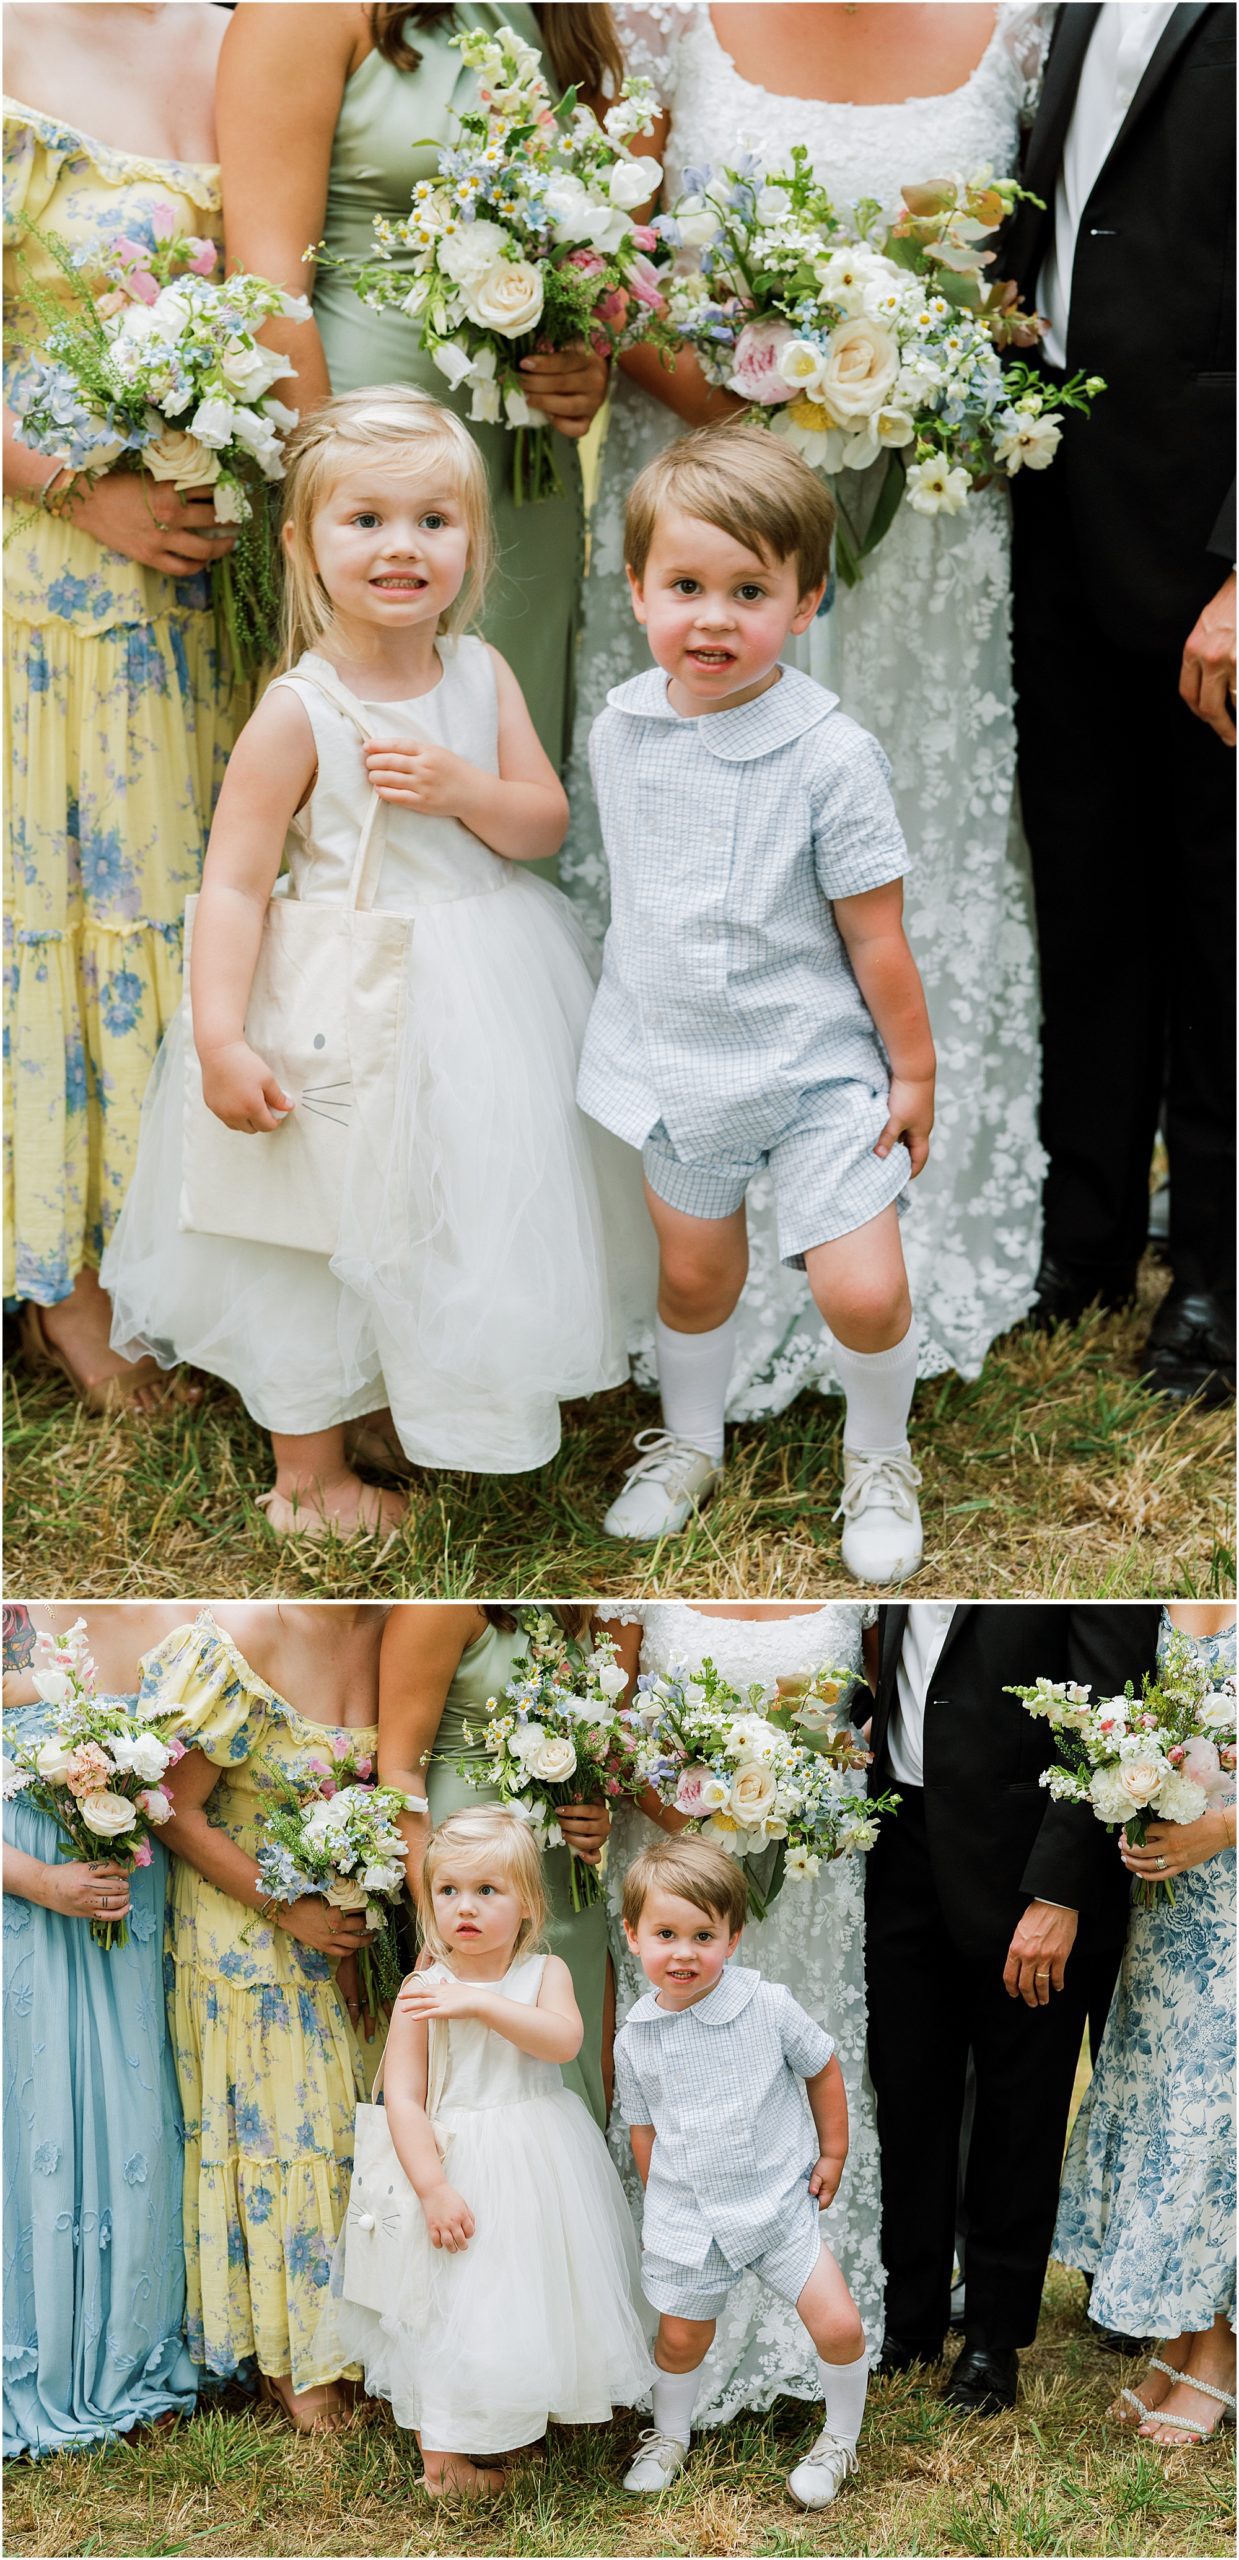 Flower girl and ring bearer with wedding party.